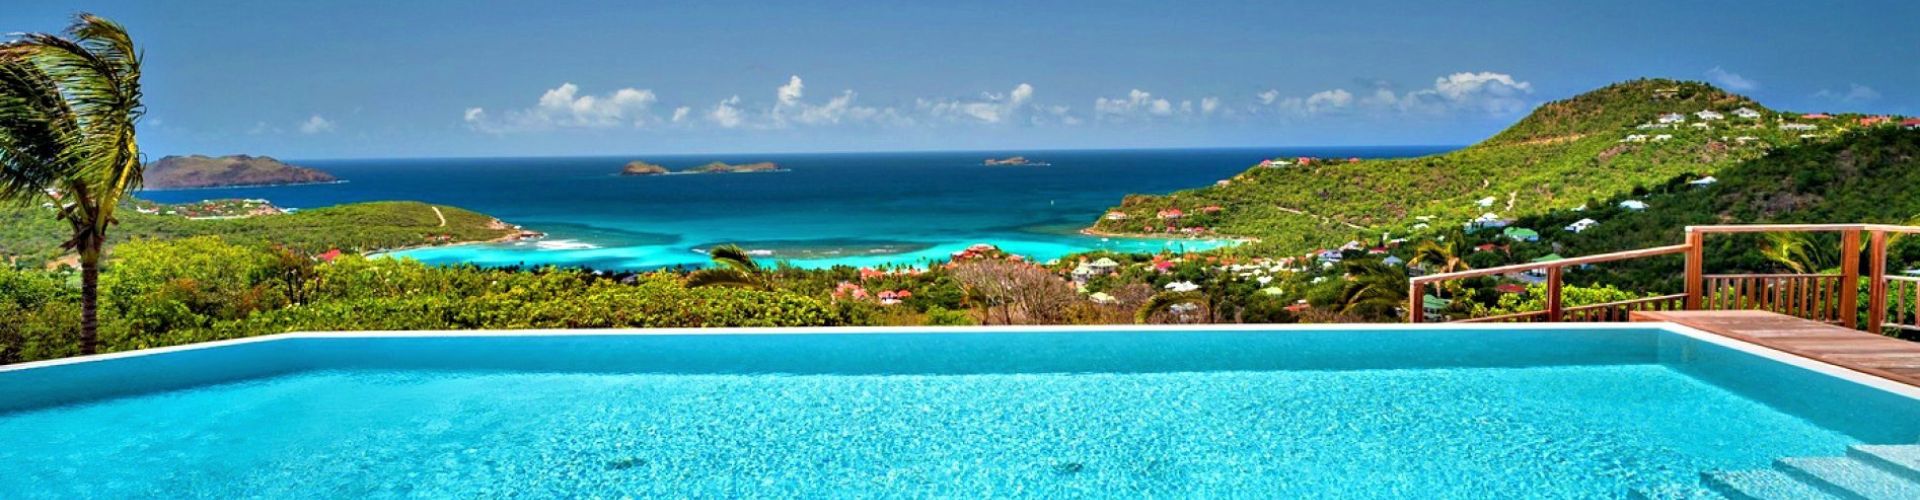 St Barths: New Finds and Old Favorites